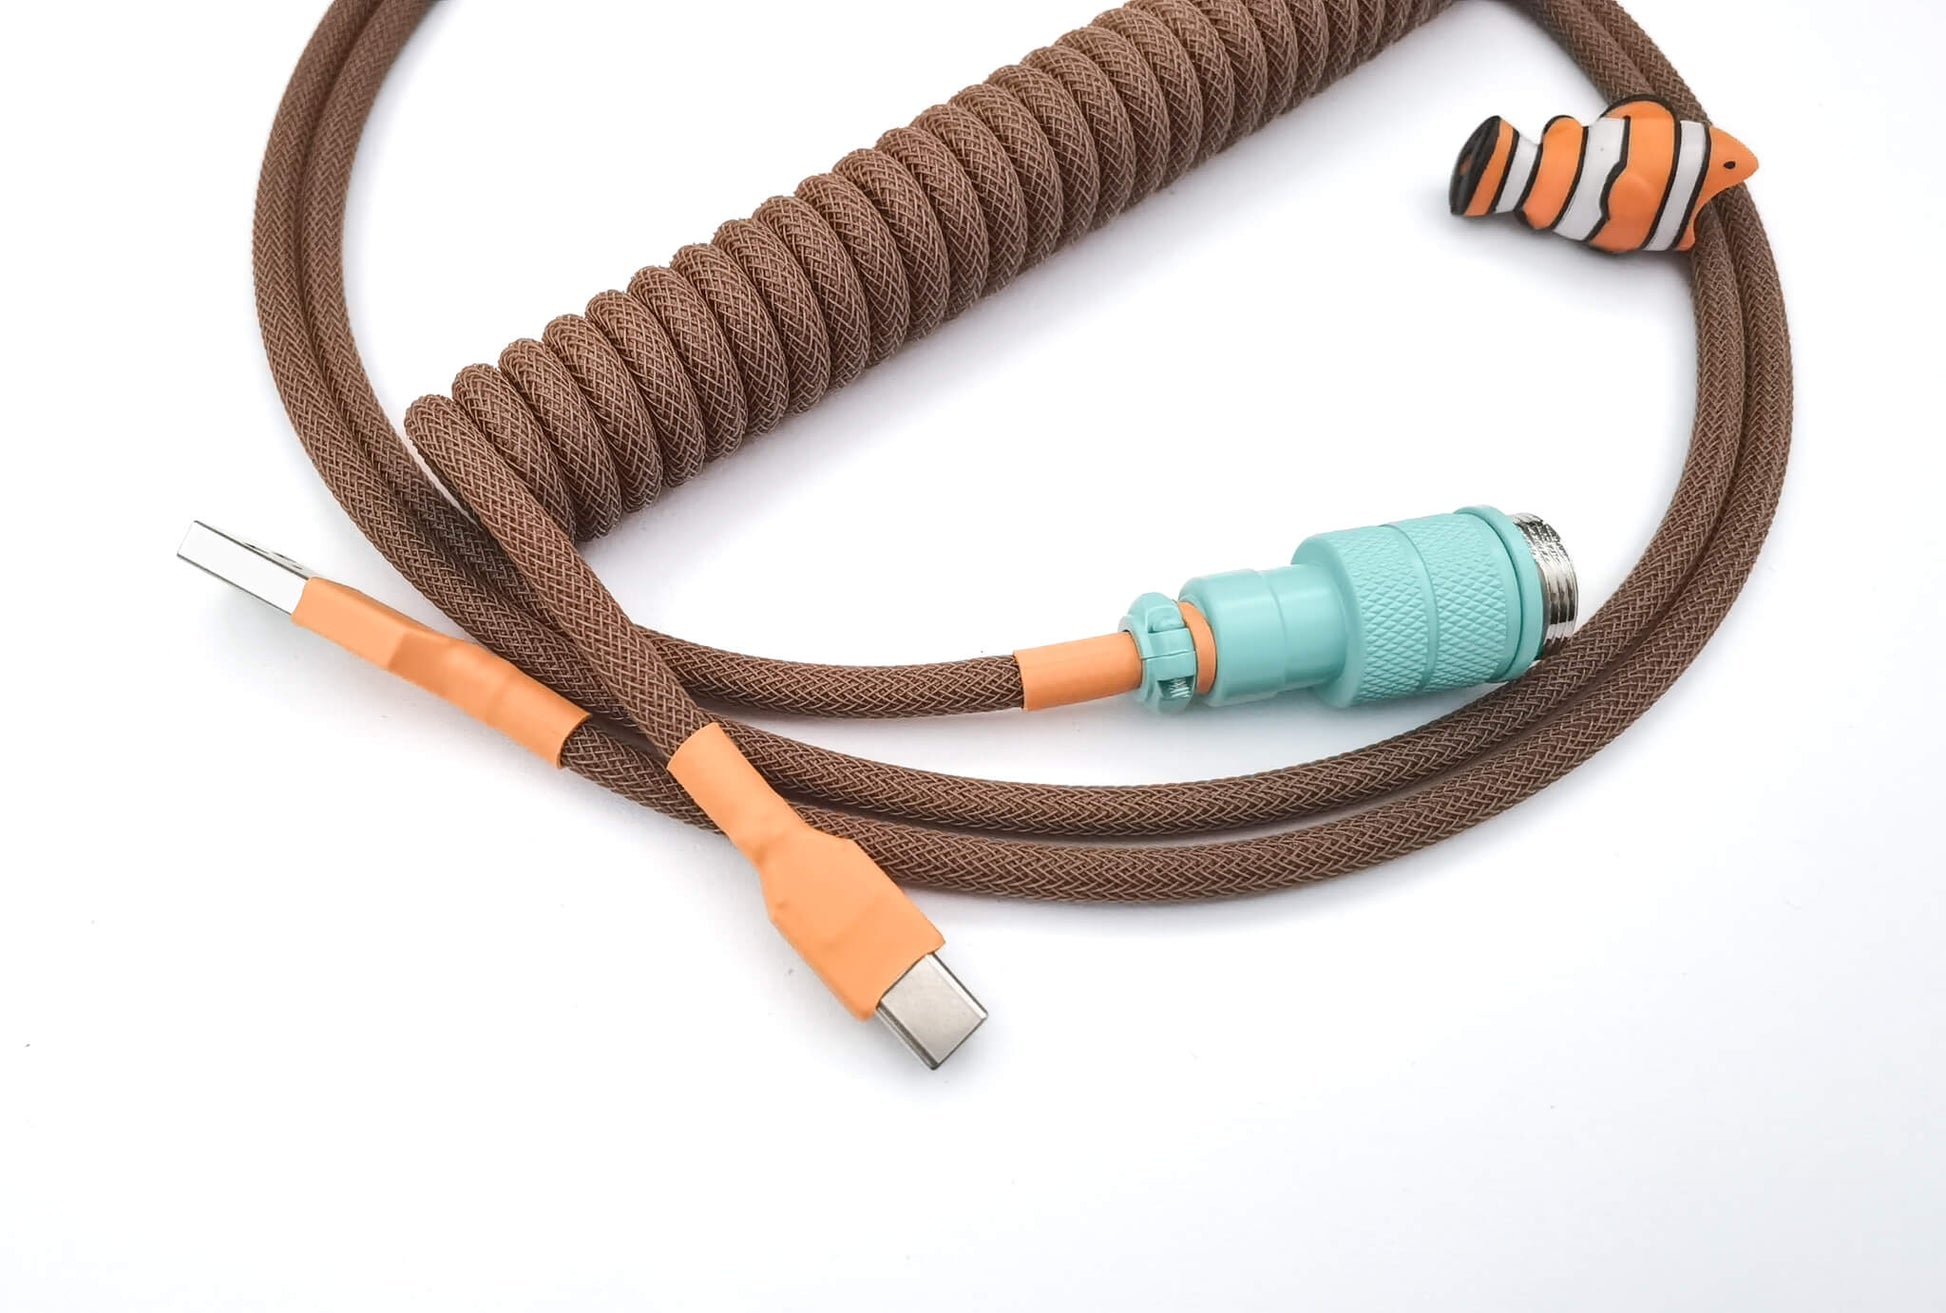 Custom Coiled USB Cable for Keyboards – SILKEYKBD